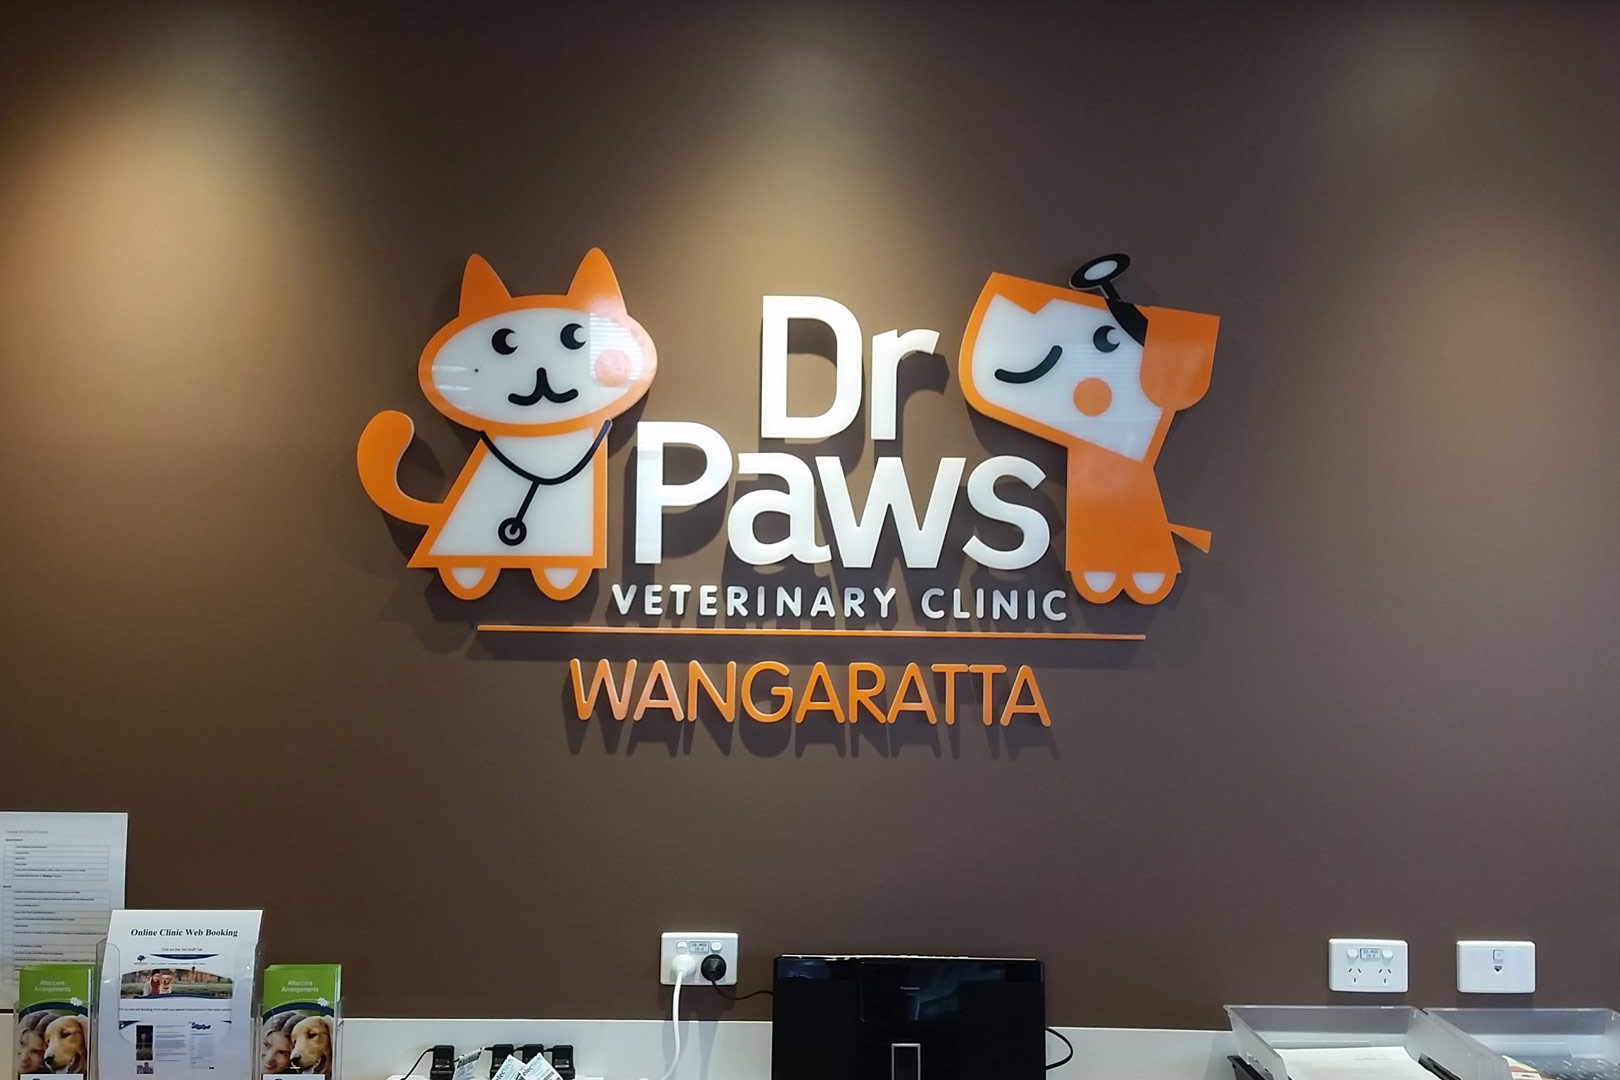  Dr Paws Veterinary Clinic 